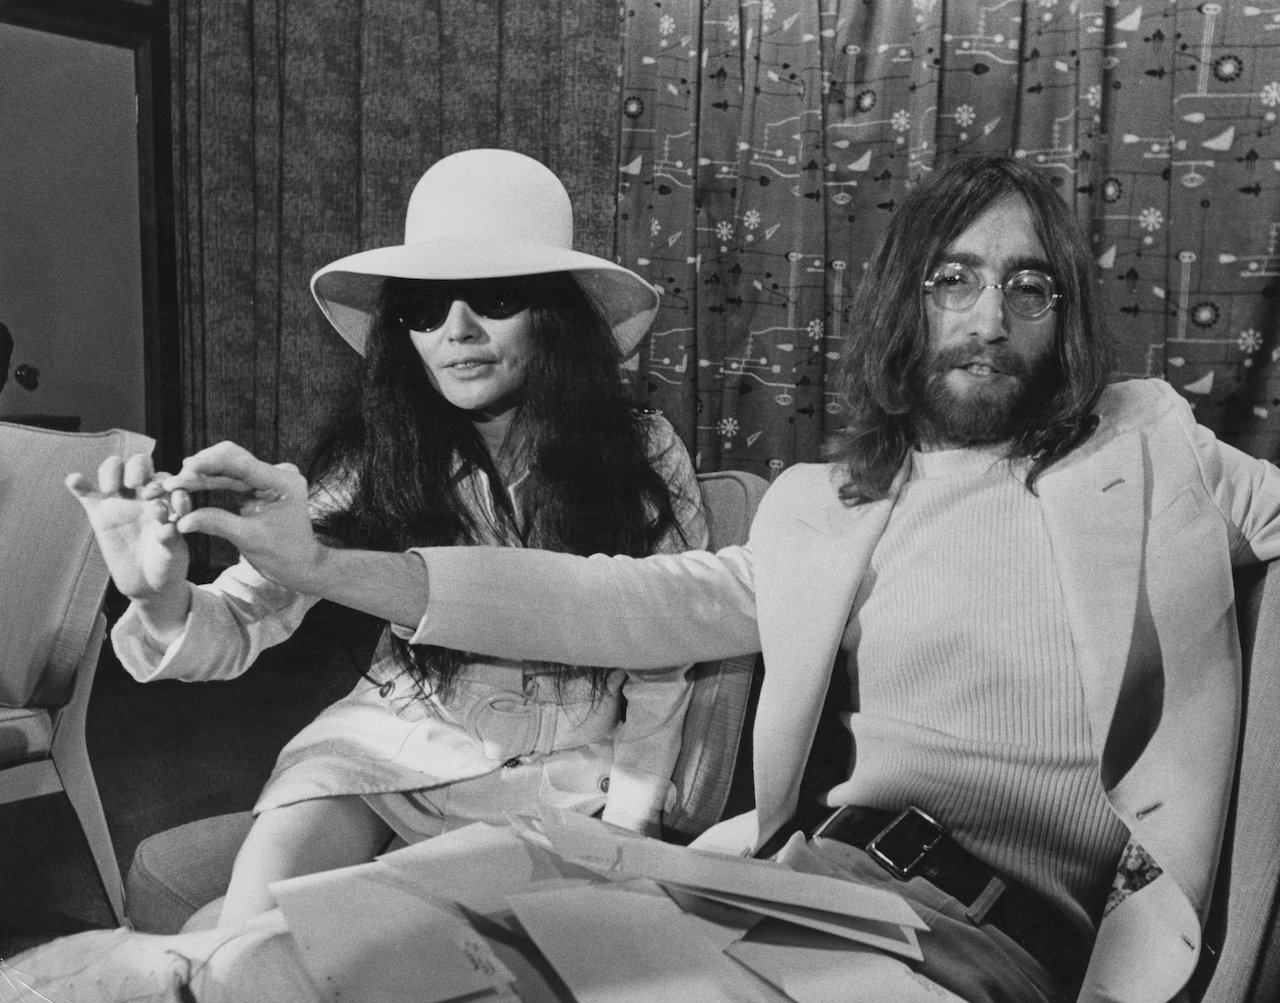 John Lennon said he probably wouldn't have bothered divorcing Yoko Ono after separation